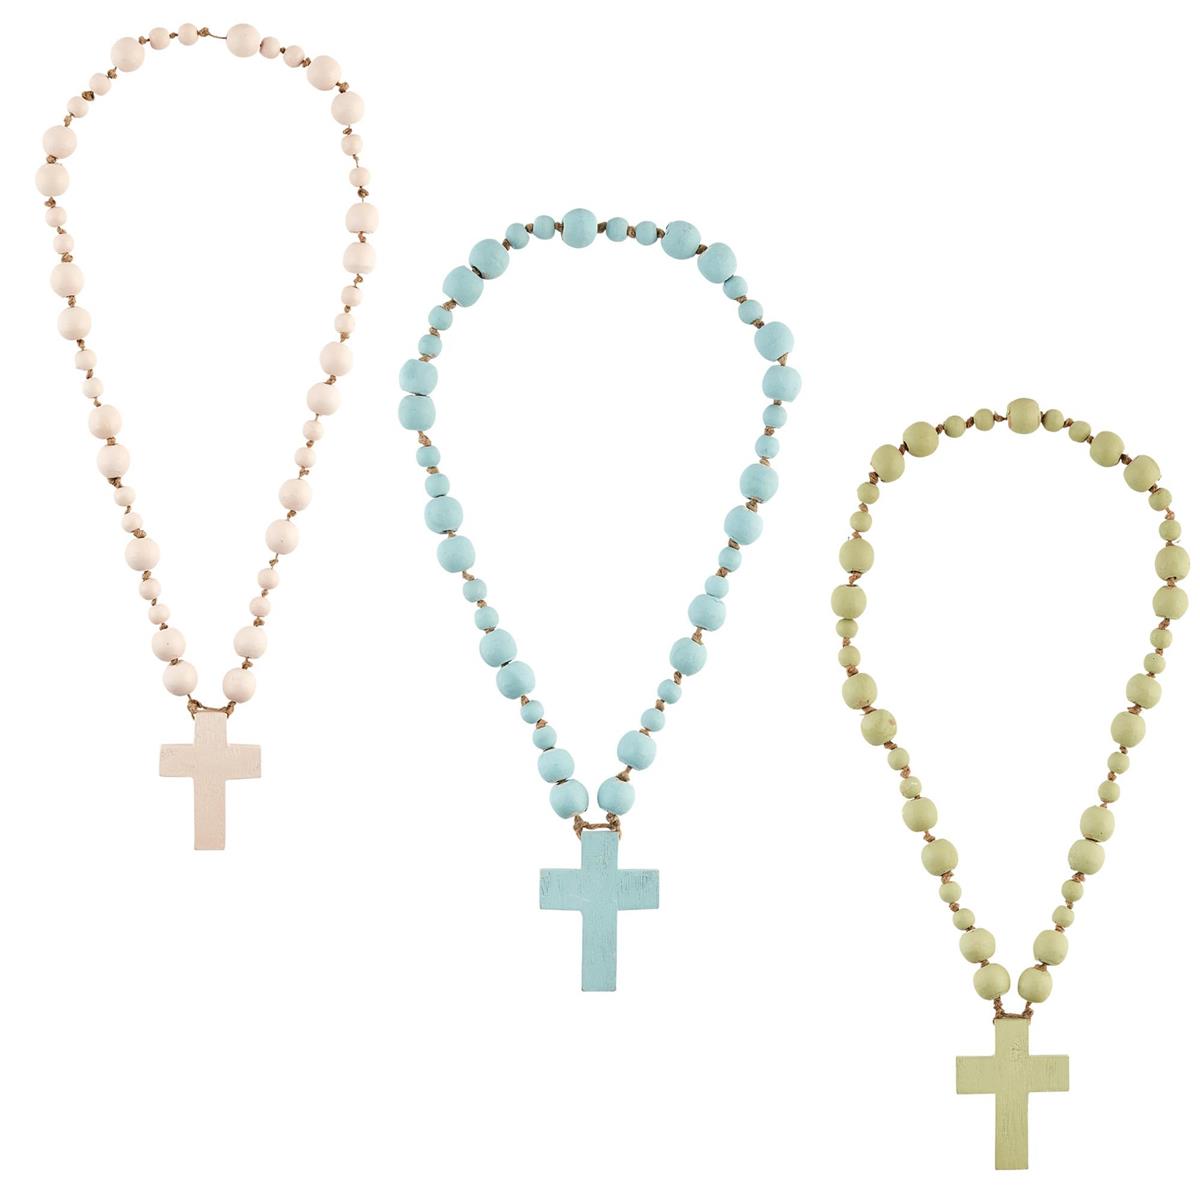 all three colors of decorative cross beads displayed on a white background